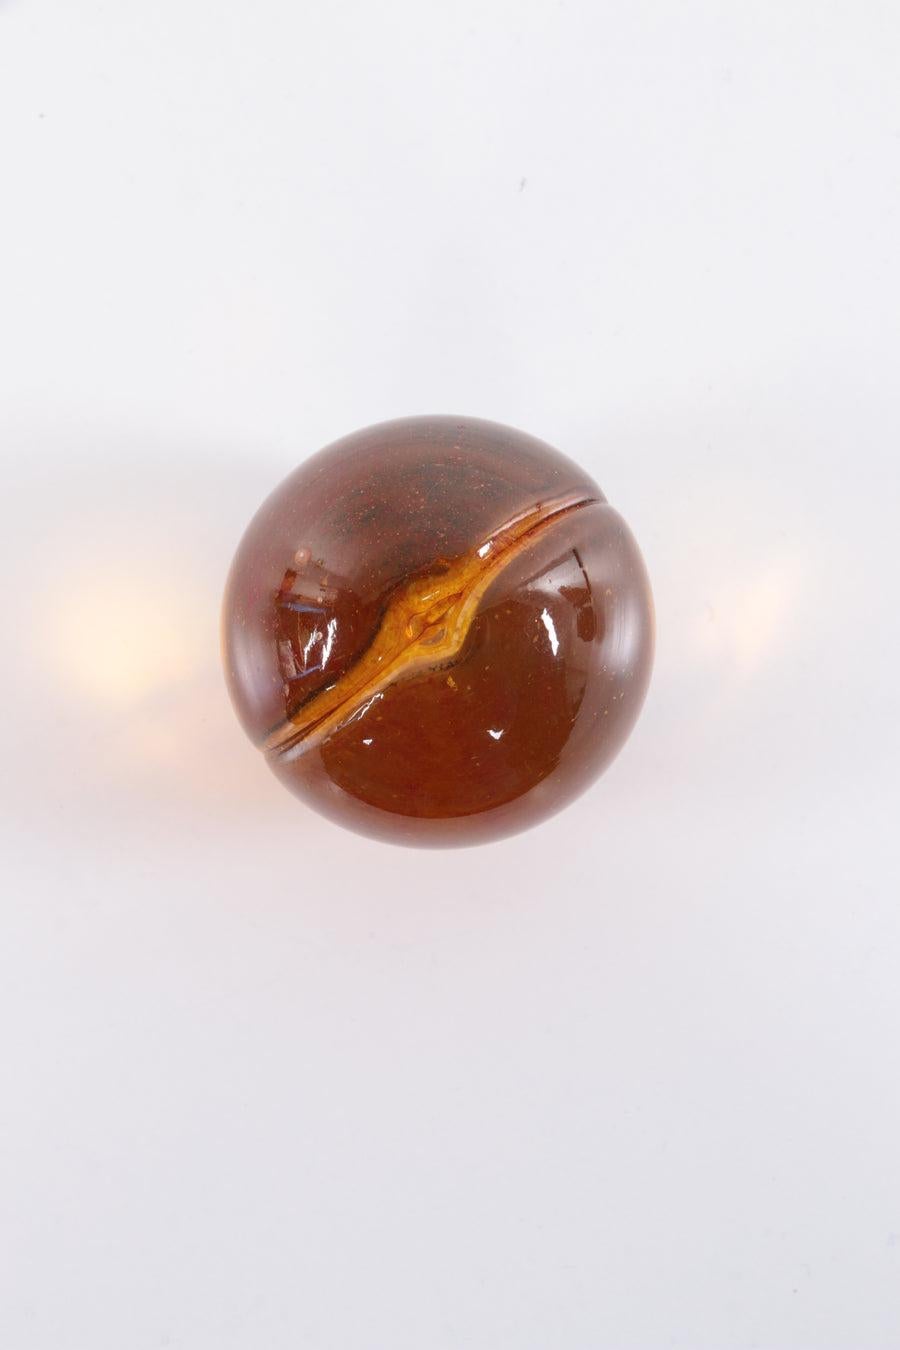 Small Model Murano Glass Paperweight Peach Orange Ball, 1970

Additional information: 
Dimensions: 4.5 W x 4.5 D x 4.5 H cm 
Period of Time: 1970
Condition: Good
